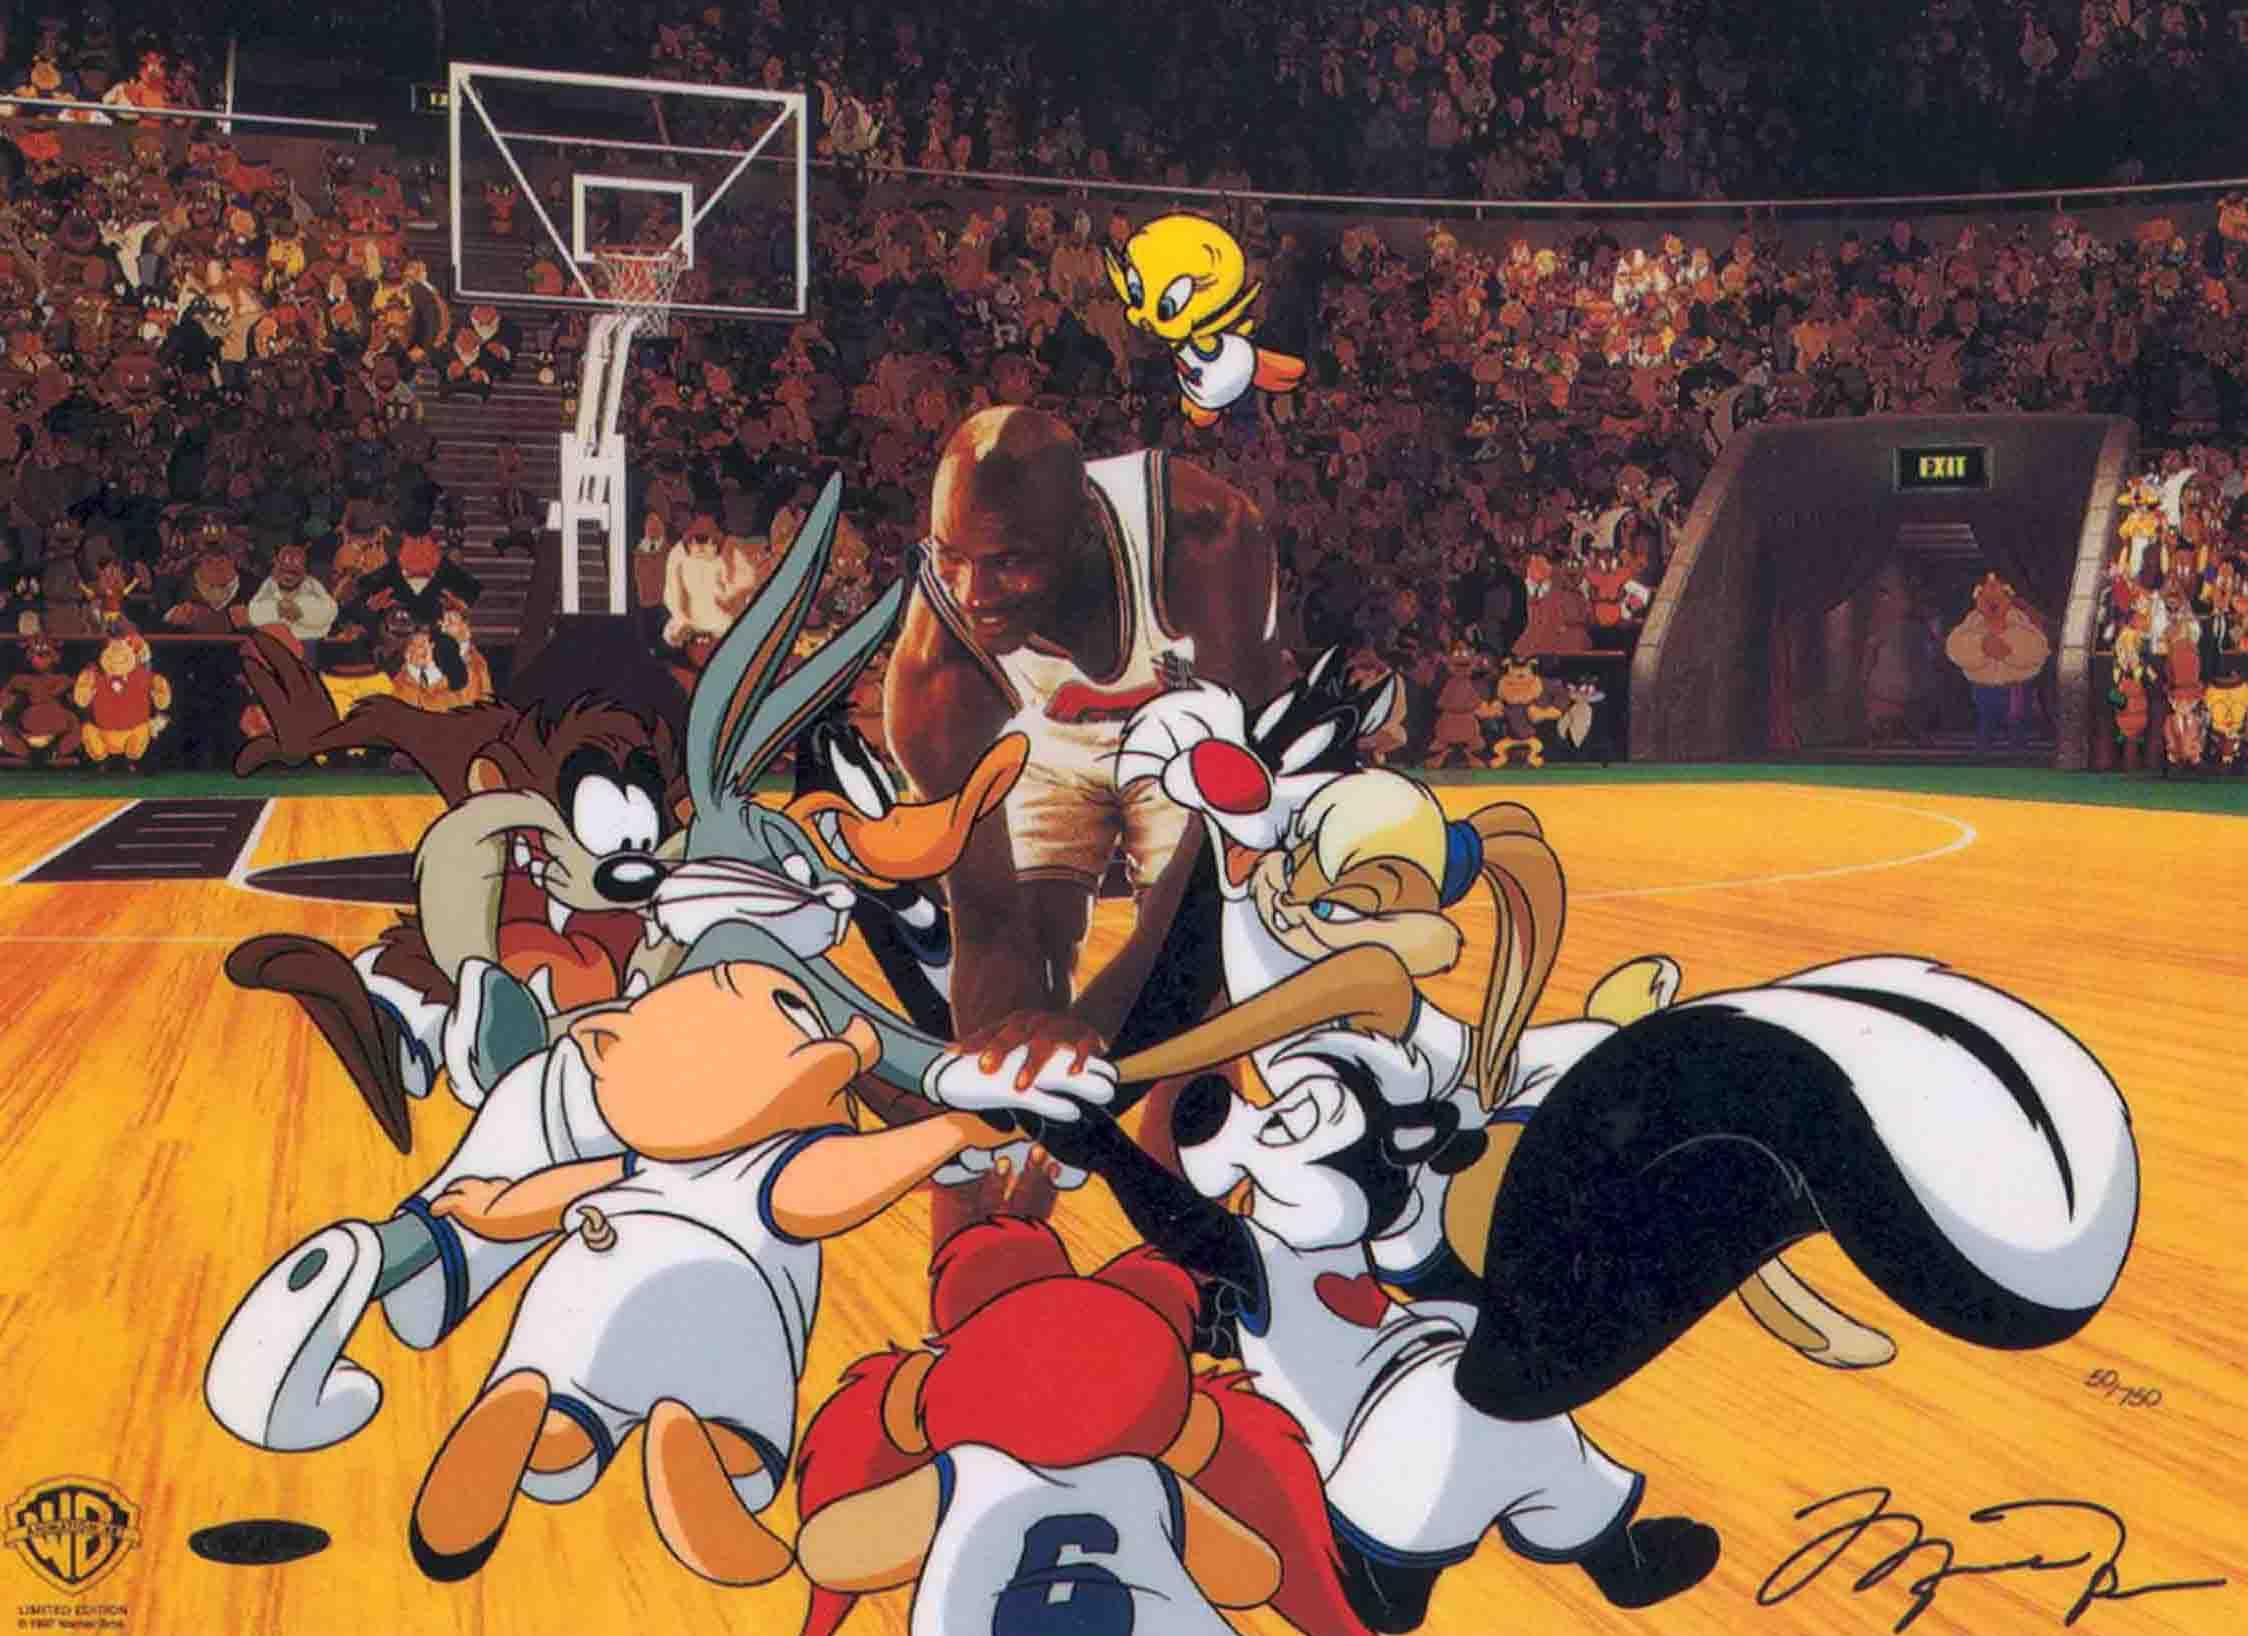 In “Toon Squad” Michael Jordan gathers the team together for a pep